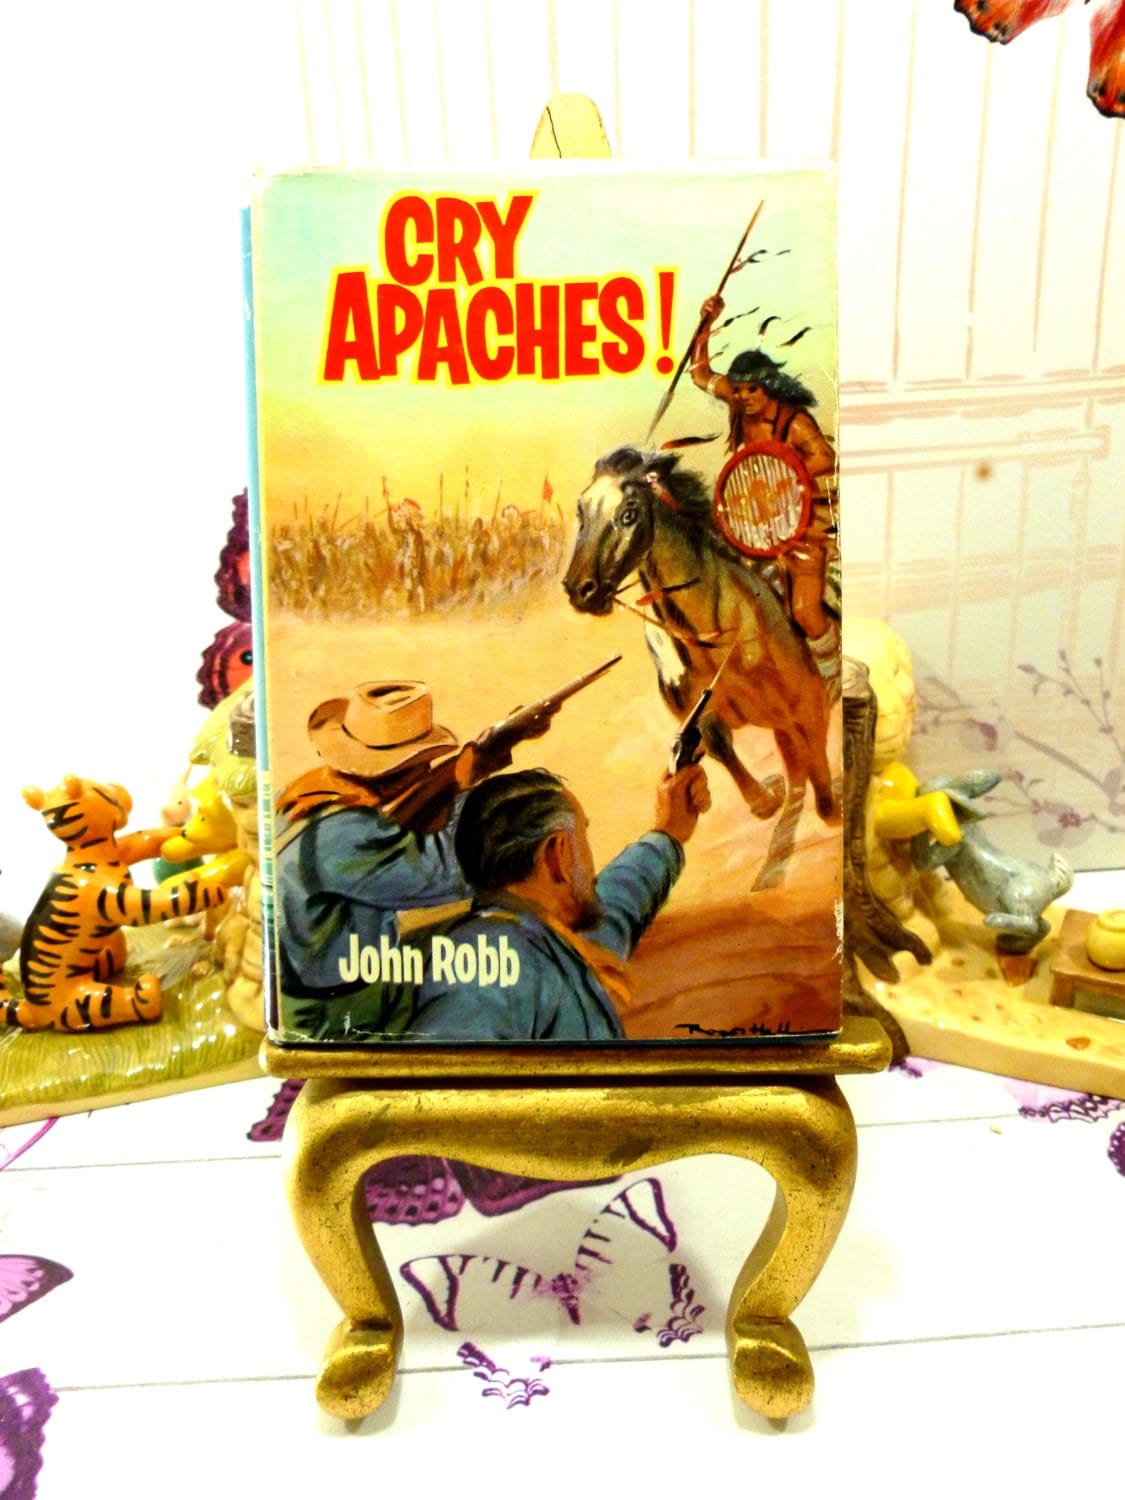 Cover of Cry Apache Catsfoot Cowboy Stories 1960s Vintage Hardback children's book showing cowboy fighting an Indian with guns. 